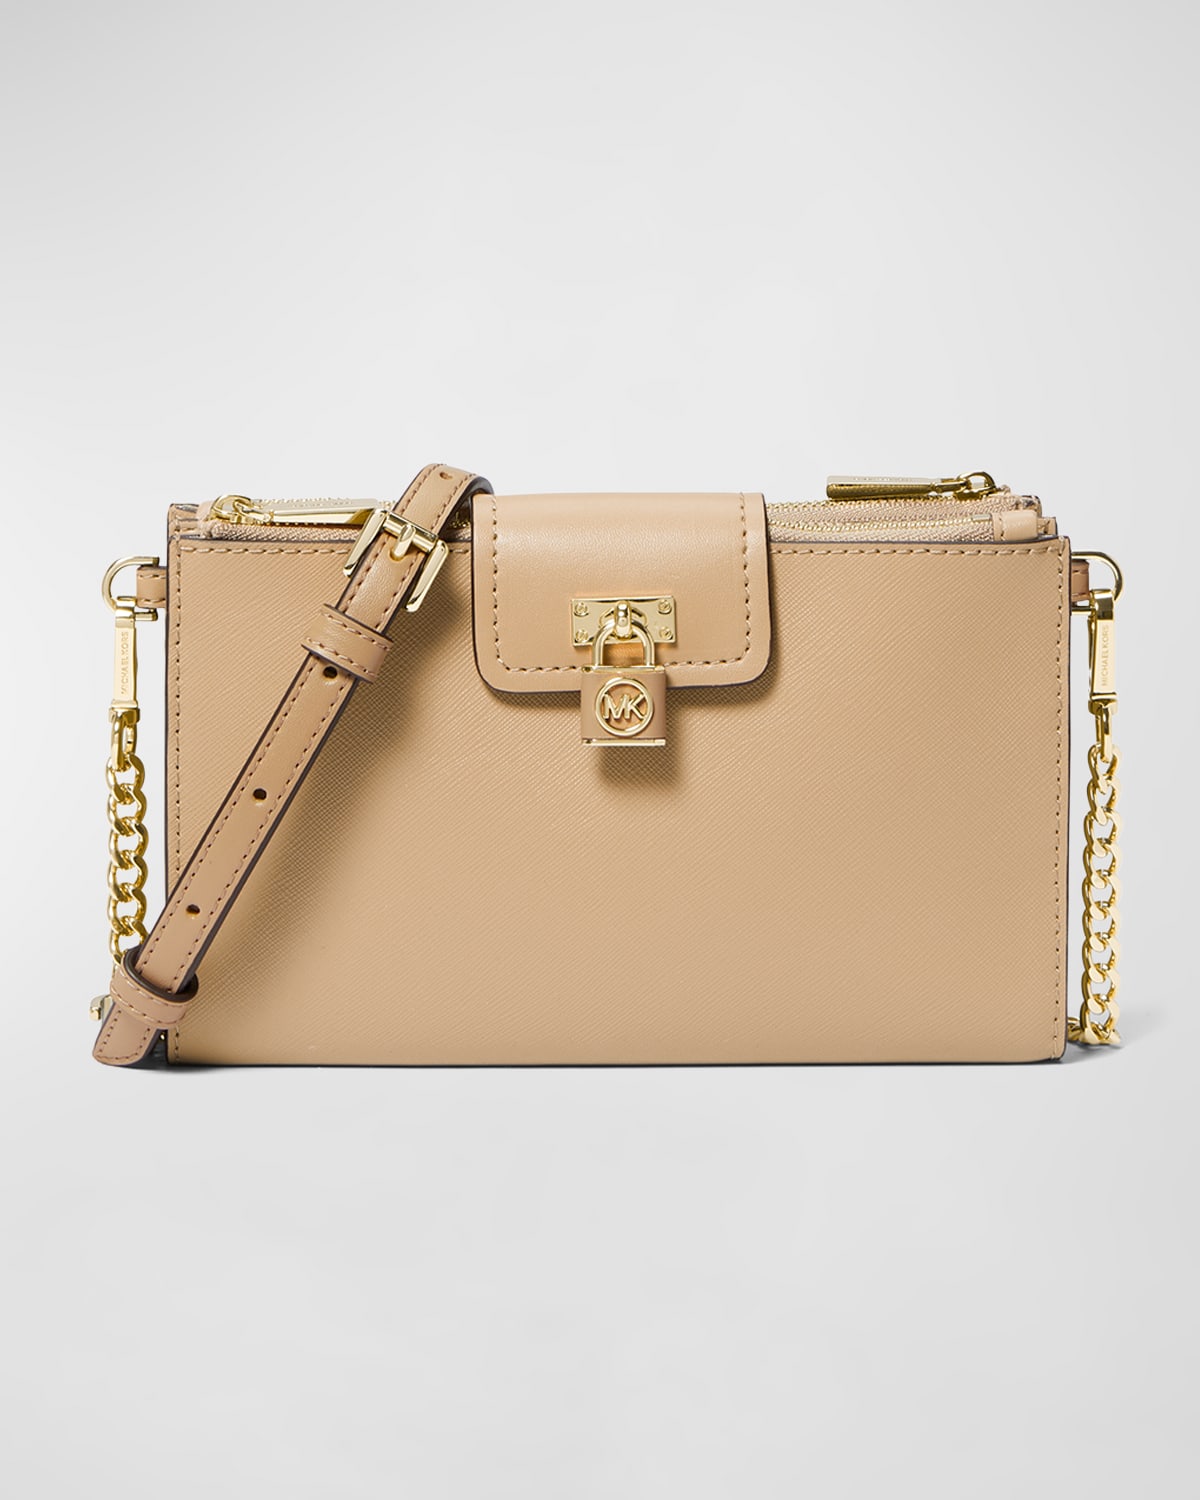 Buy Michael Kors Ruby Small Saffiano Leather Satchel - Camel